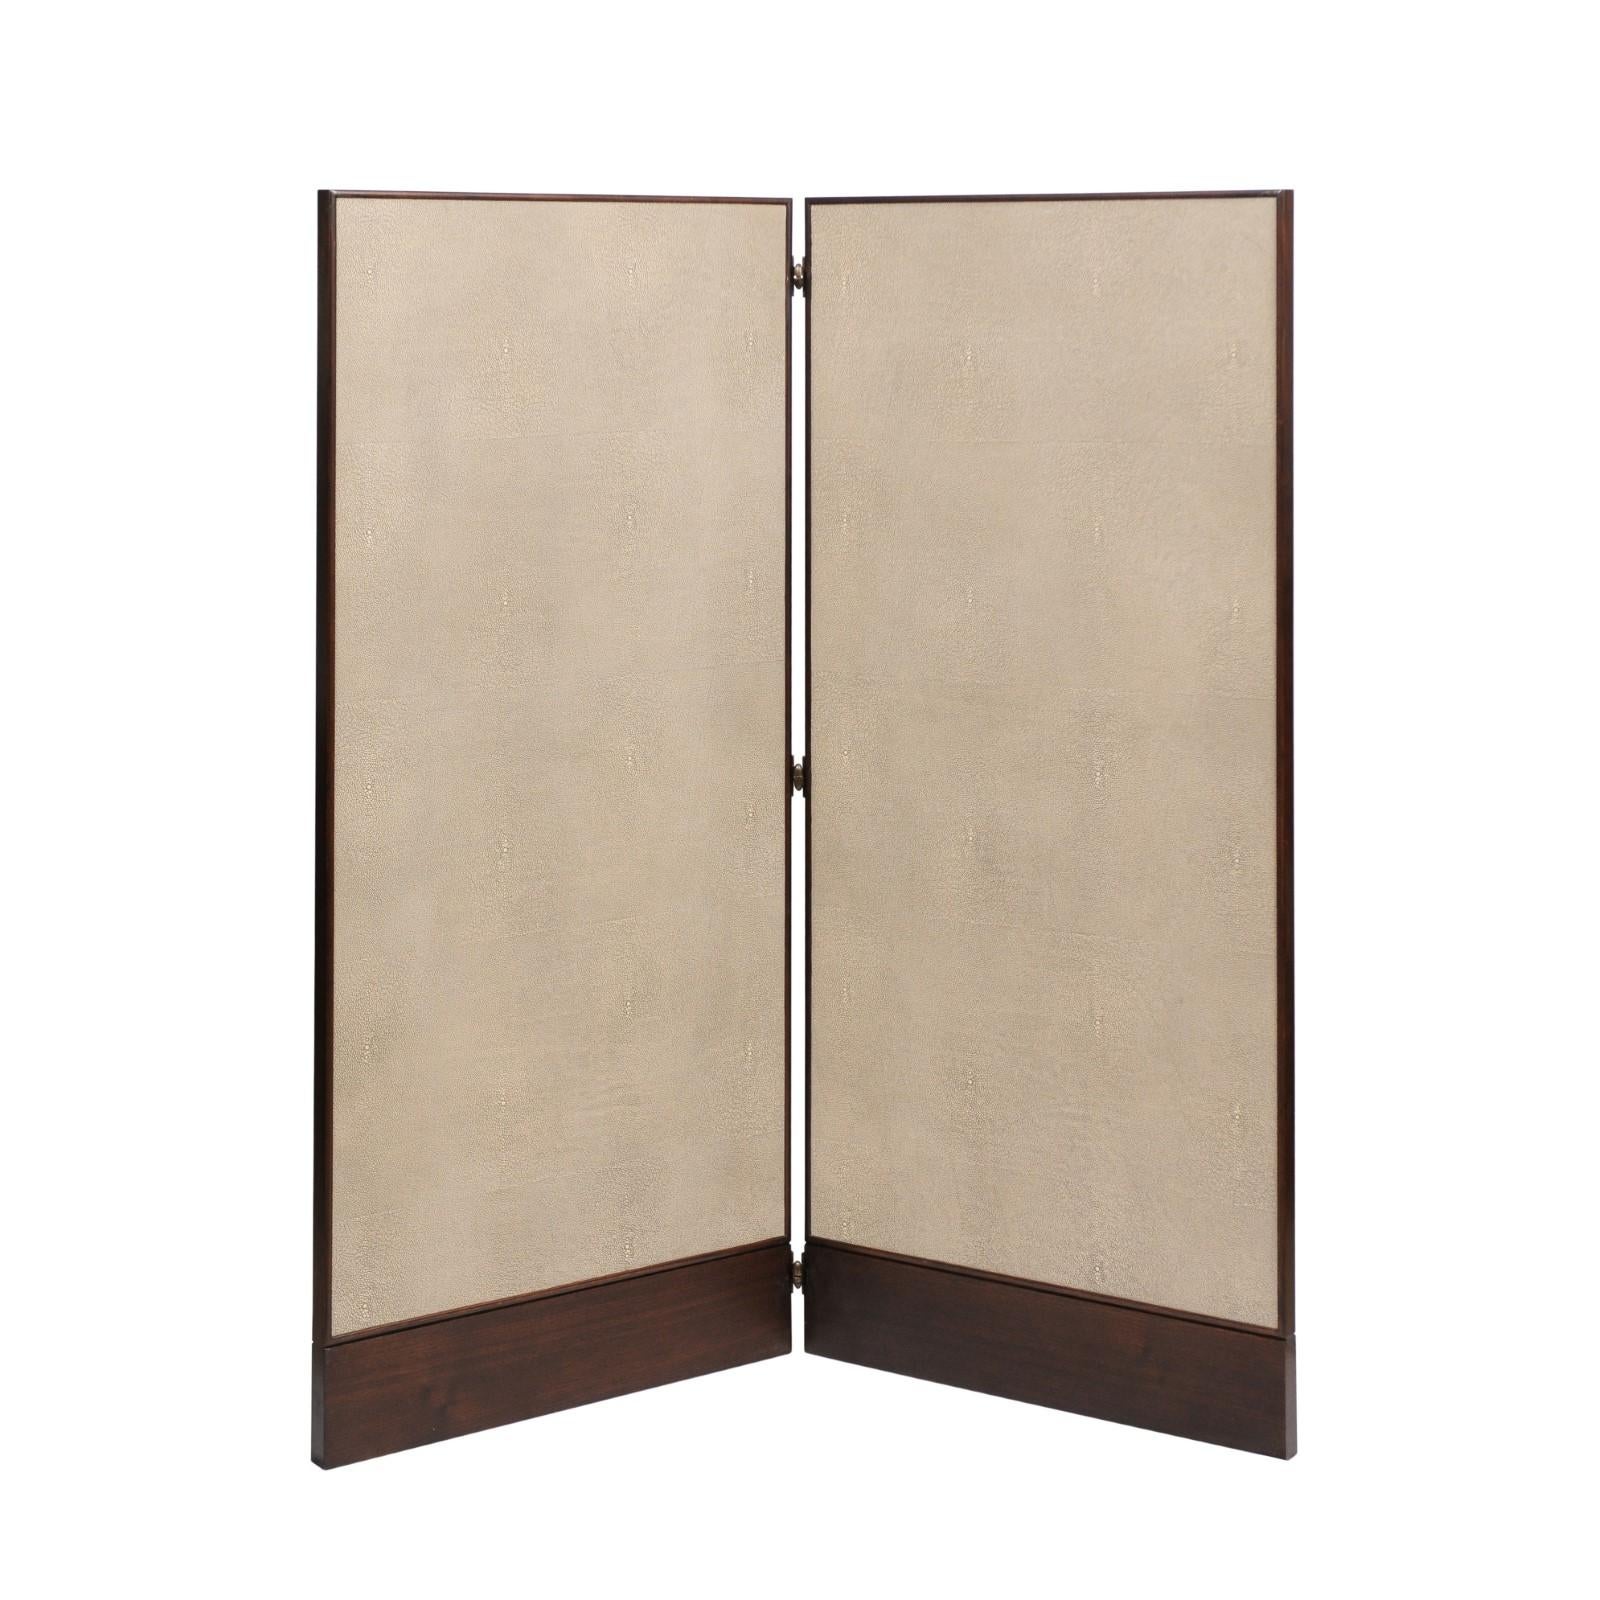 A Classic and rare collaboration between Barbara Barry and Baker Furniture: the Silent Veneer and Shagreen Screen. This listing is for a pair of screens. The nougat colored shagreen is framed within a brunette finish veneer, and both the veneers and